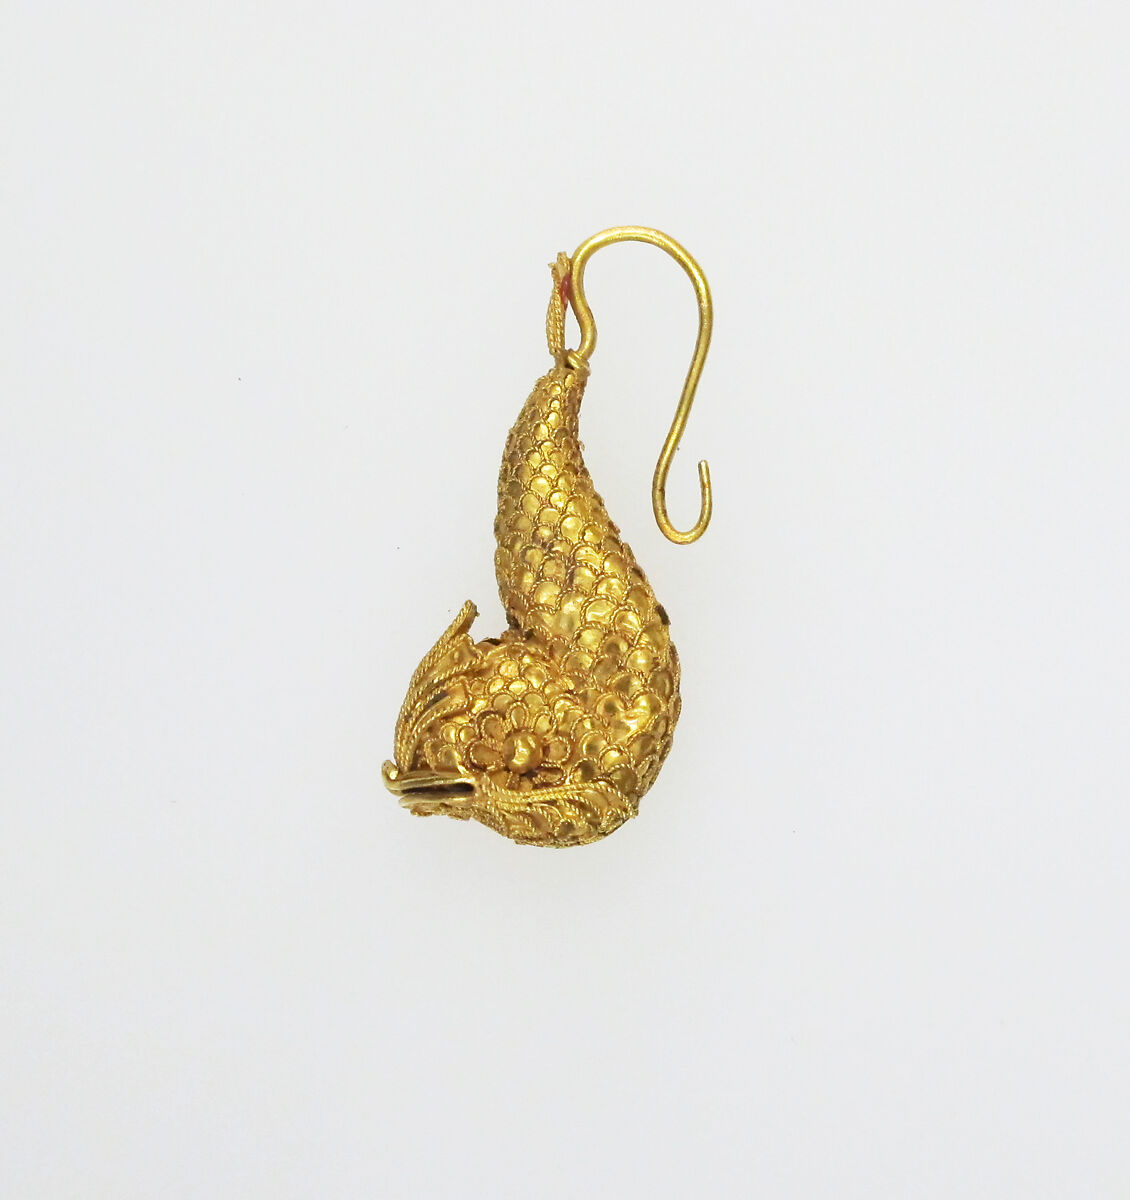 Earring in the form of a dolphin, Gold, Etruscan